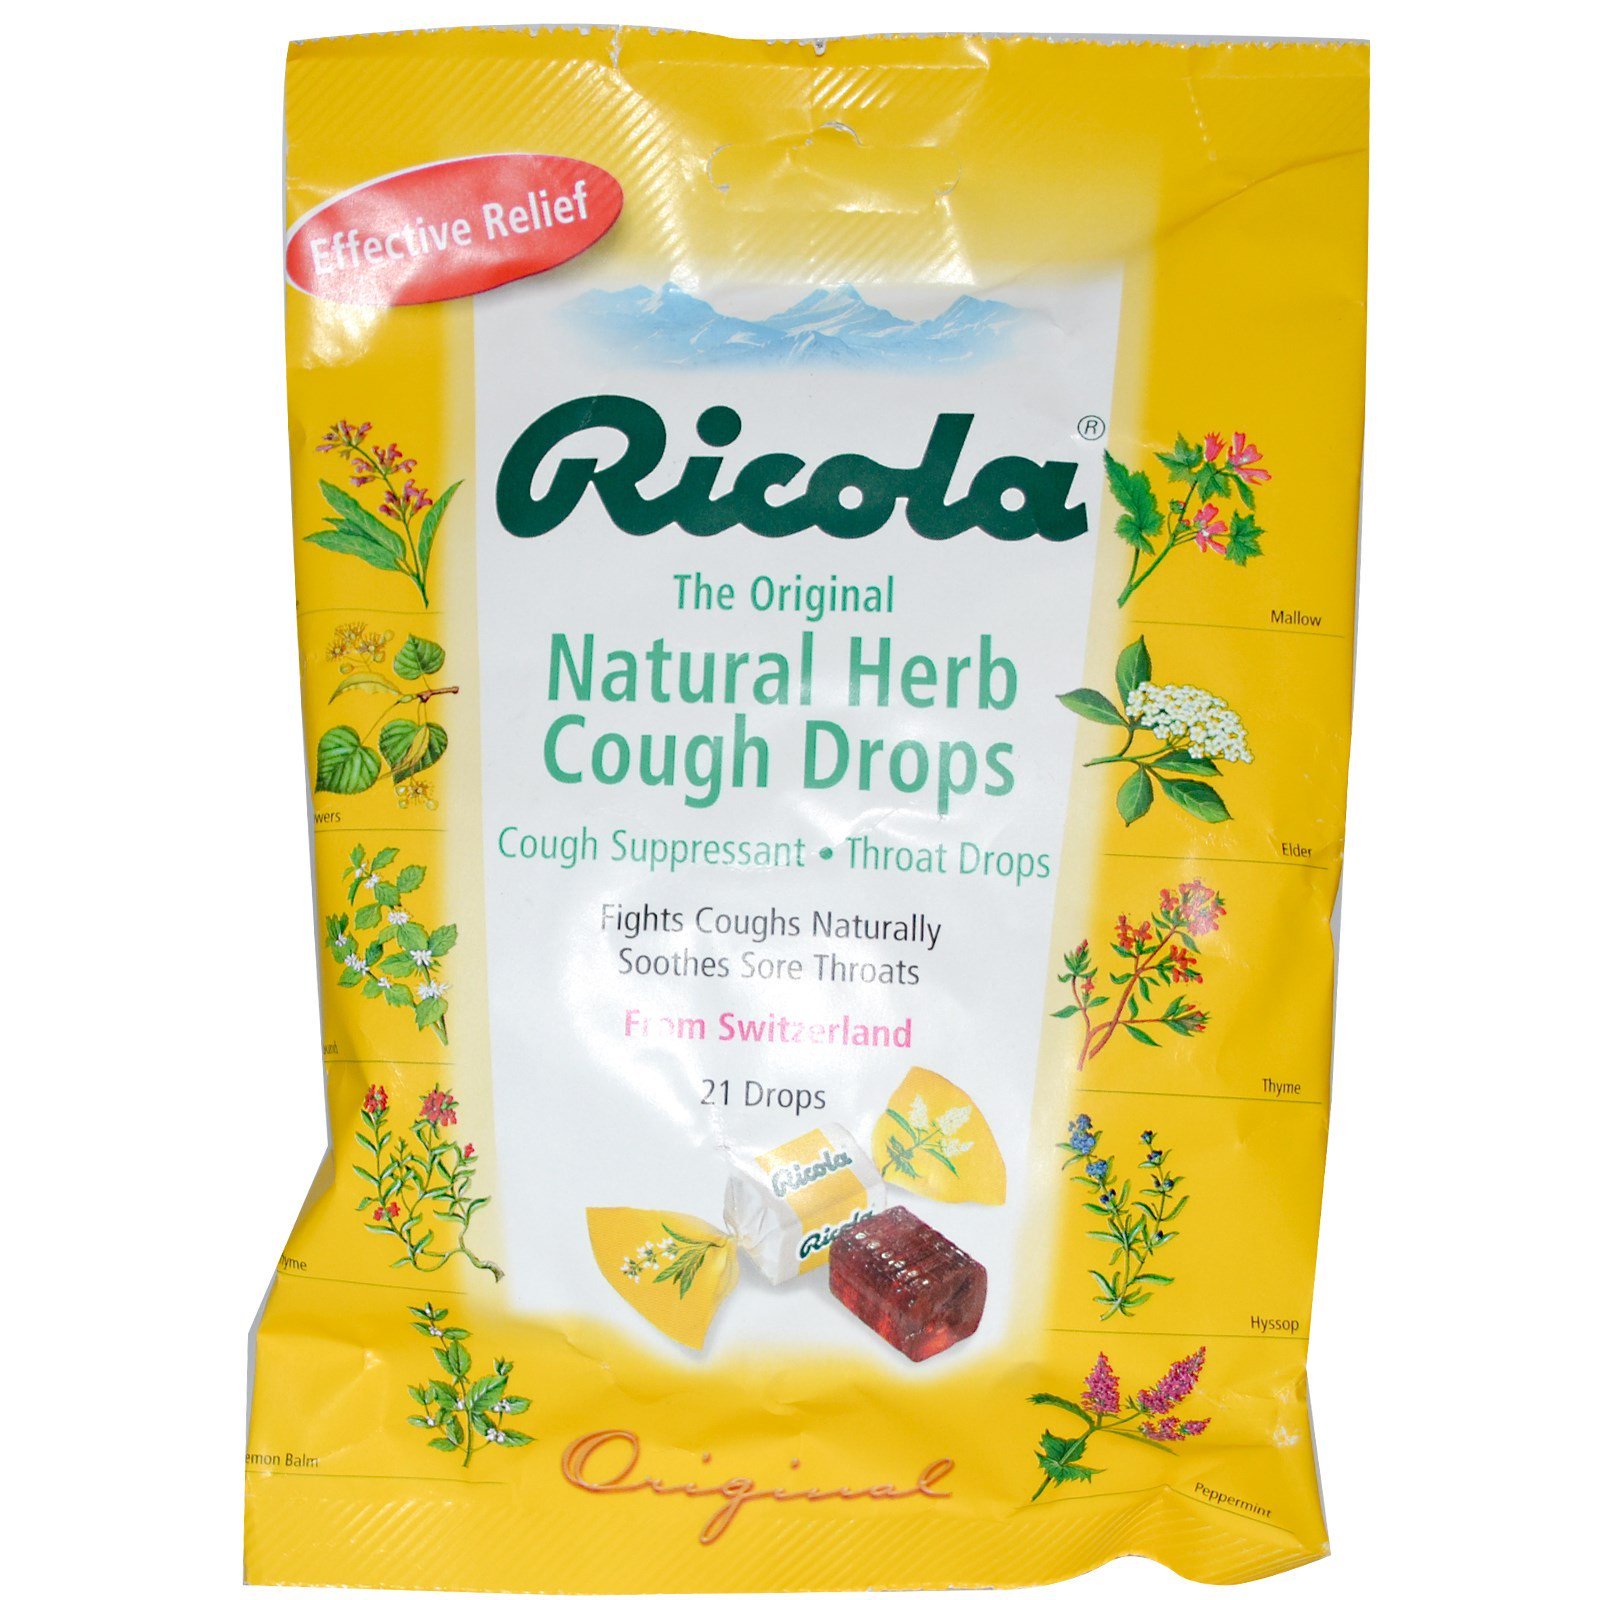 Buy Best Cough Suppressant Online in Hungary at Best Prices